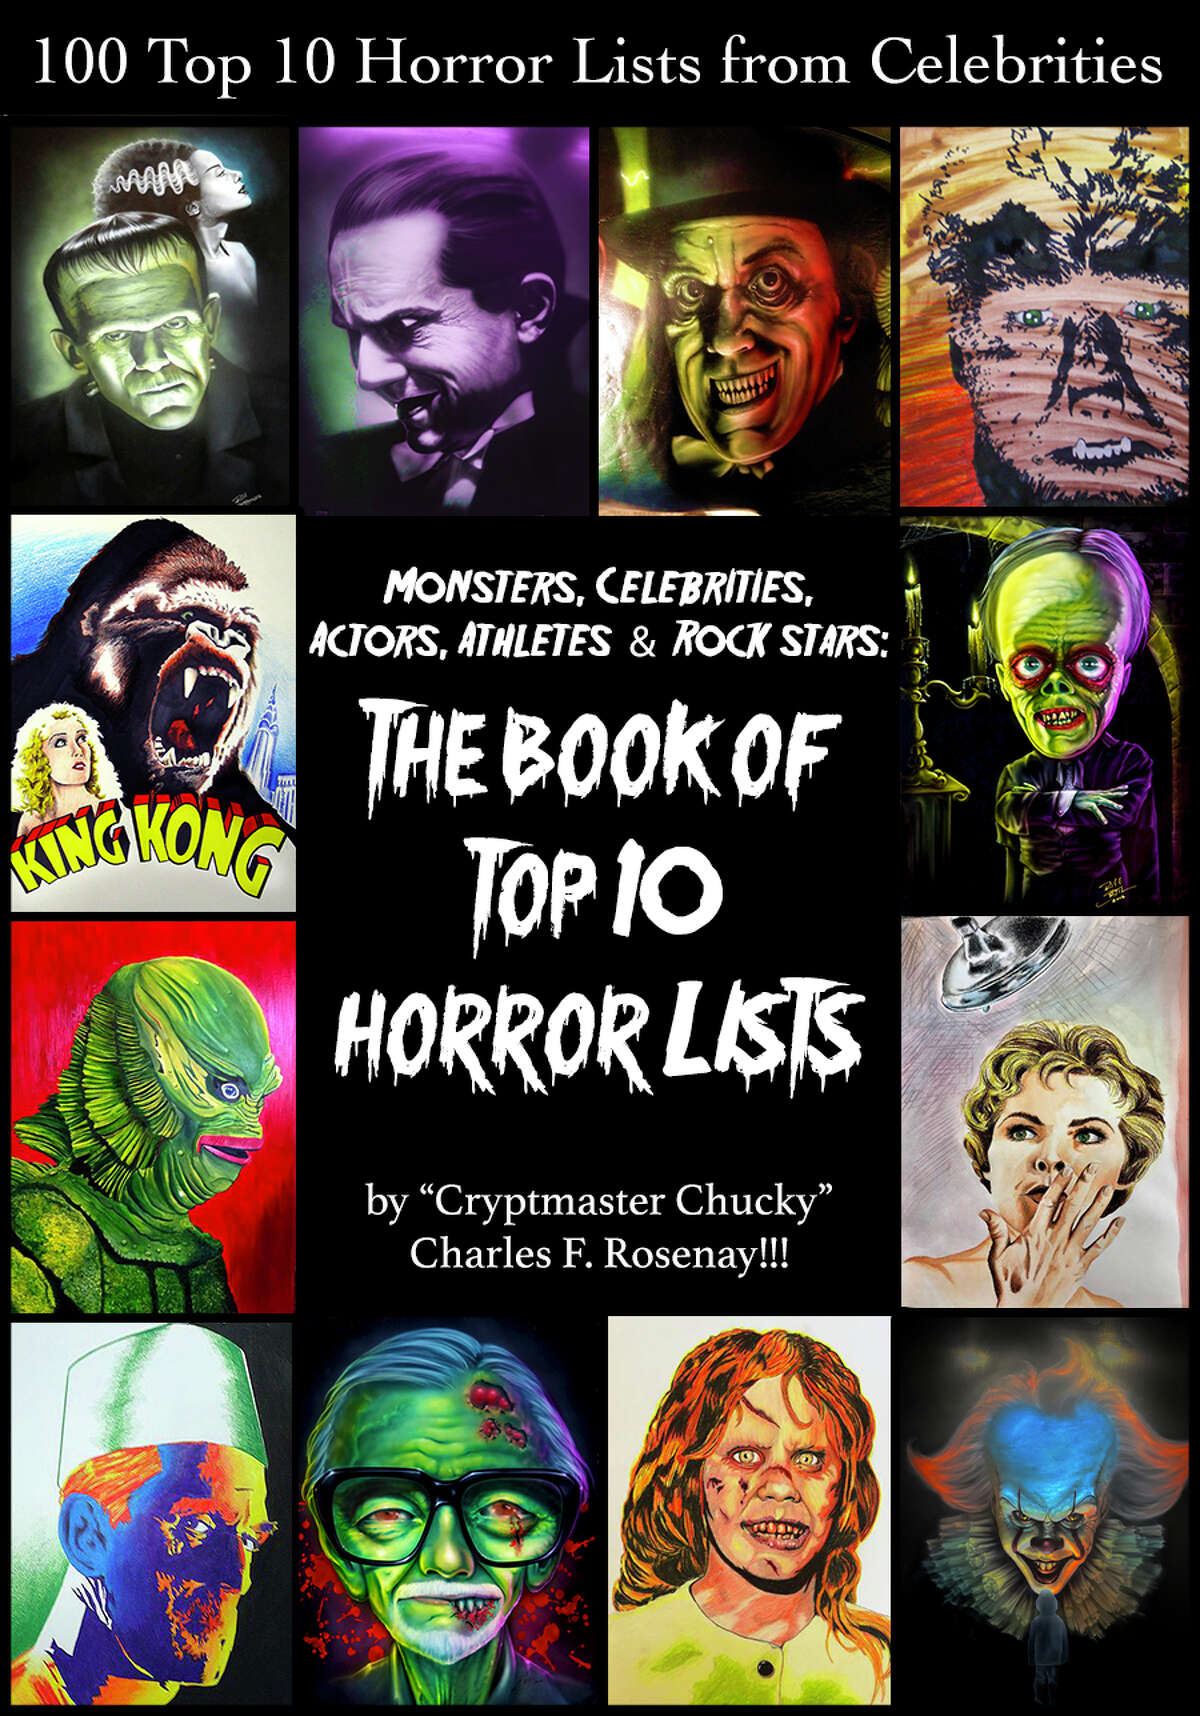 Orange resident, Charles F. Rosenay published "The Book of Top 10 Horror Lists" featuring celebrity picks. 